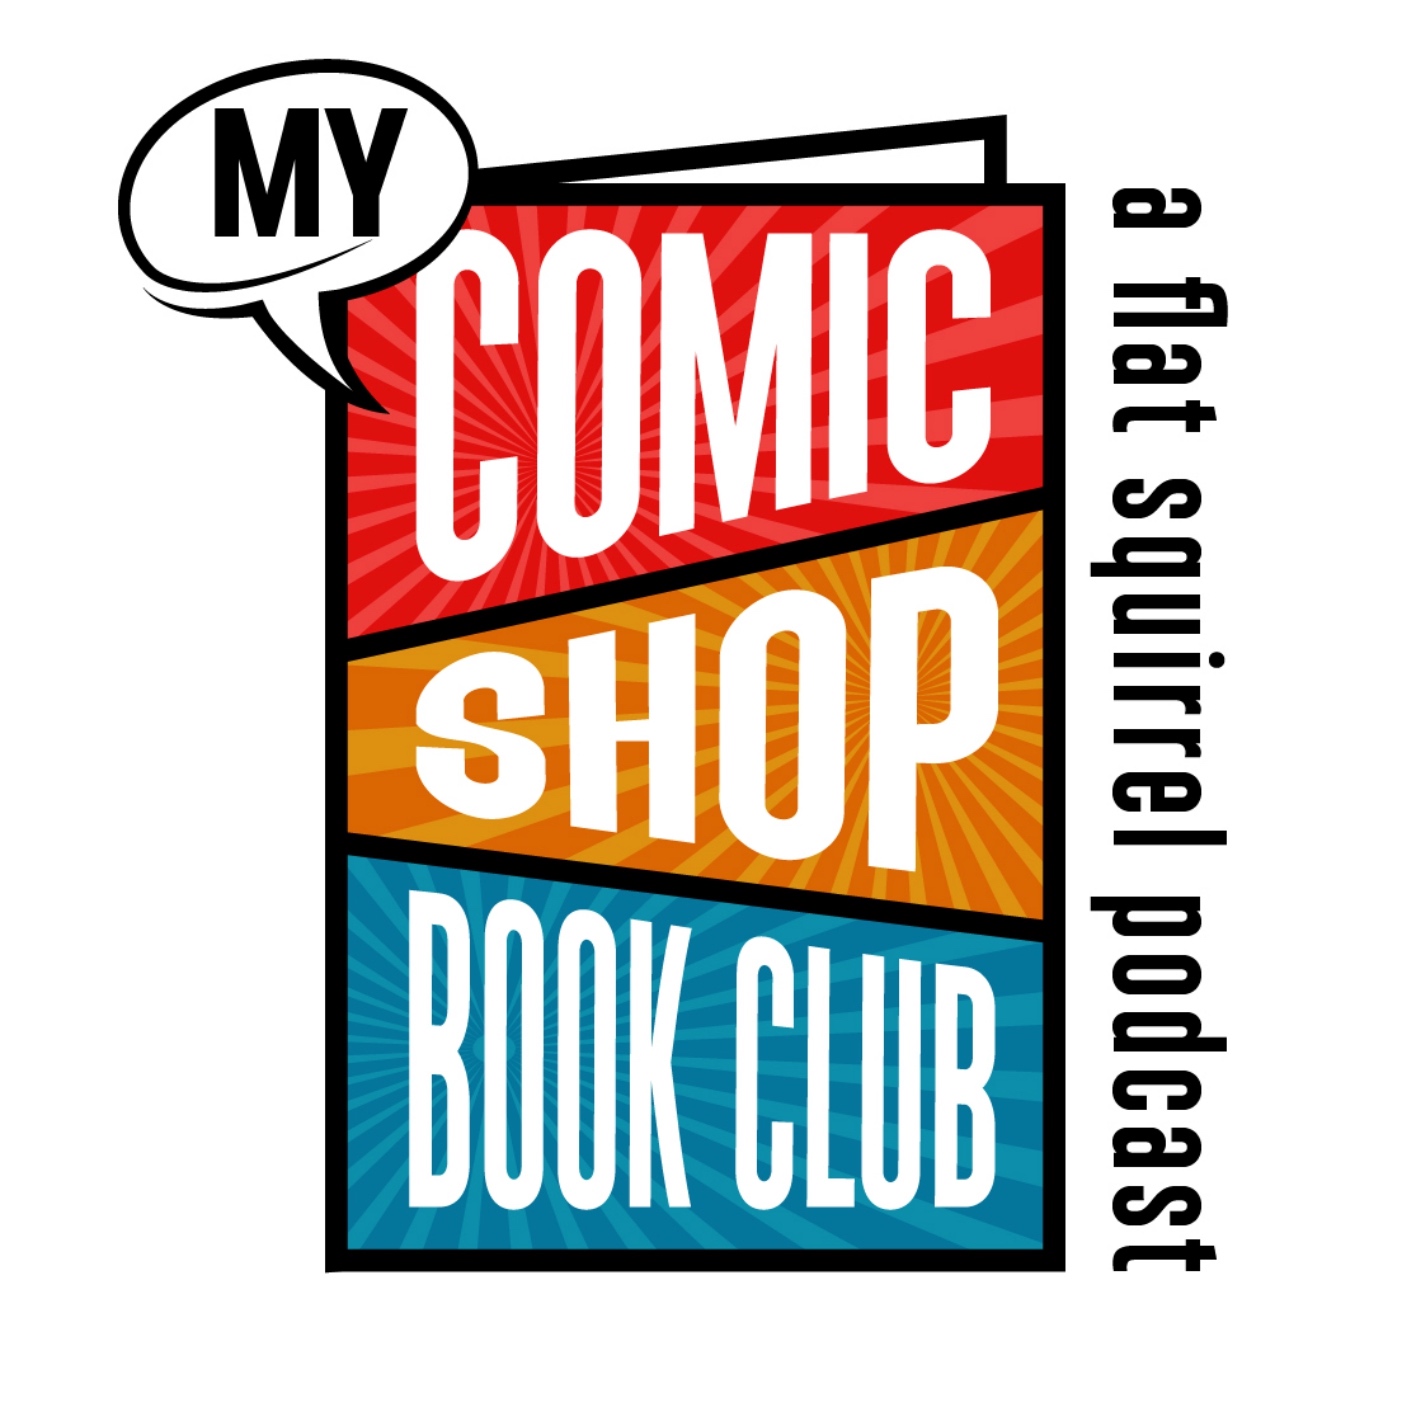 Artwork for podcast My Comic Shop History